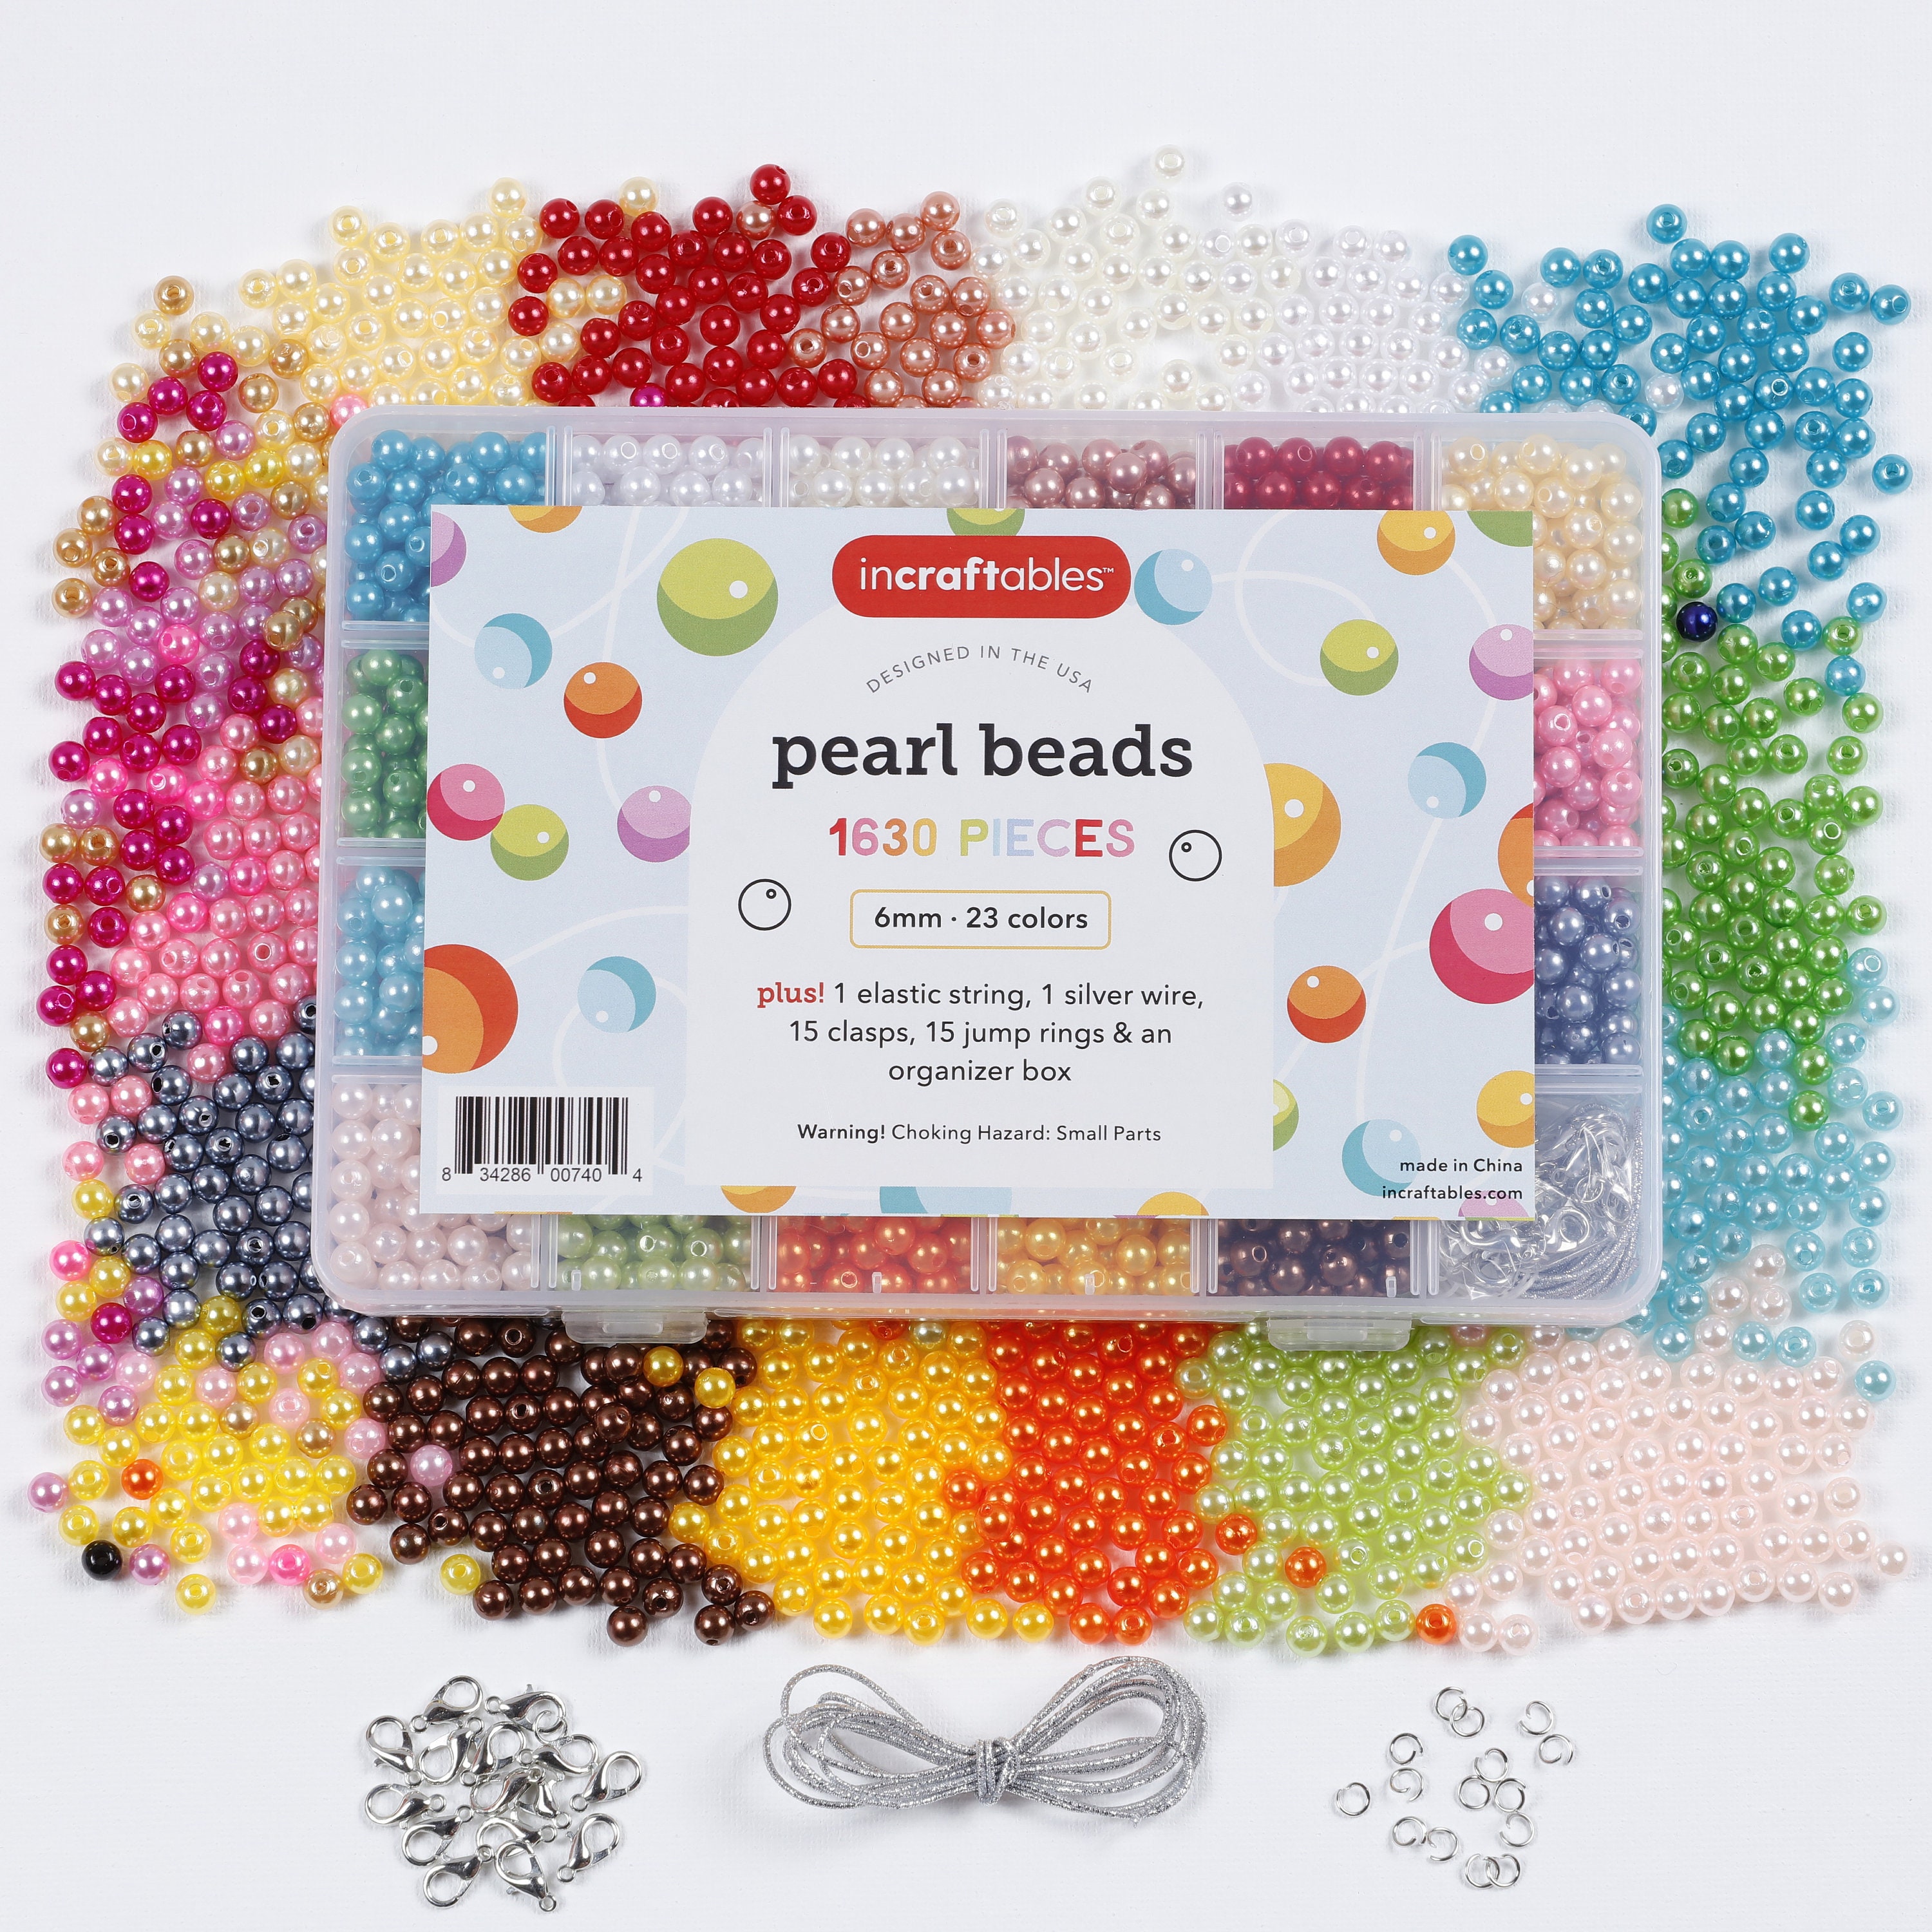  1680PCS 6mm Pearl Beads for Crafts, 24 Colors